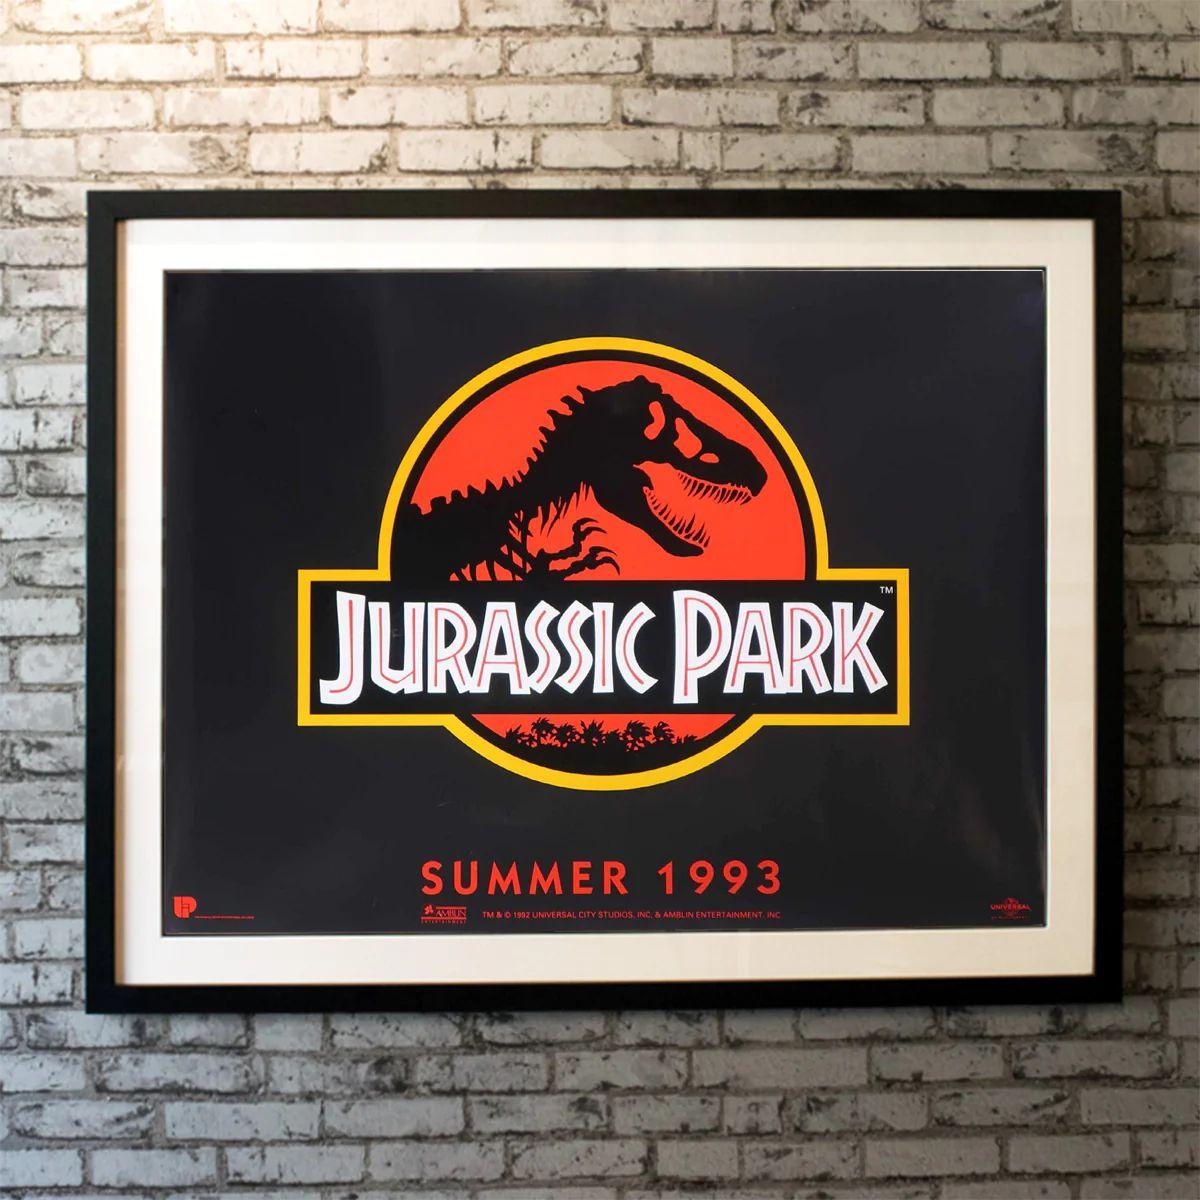 Jurassic Park, Unframed Poster, 1993

Original British Quad (30 X 40 Inches). A pragmatic paleontologist touring an almost complete theme park on an island in Central America is tasked with protecting a couple of kids after a power failure causes